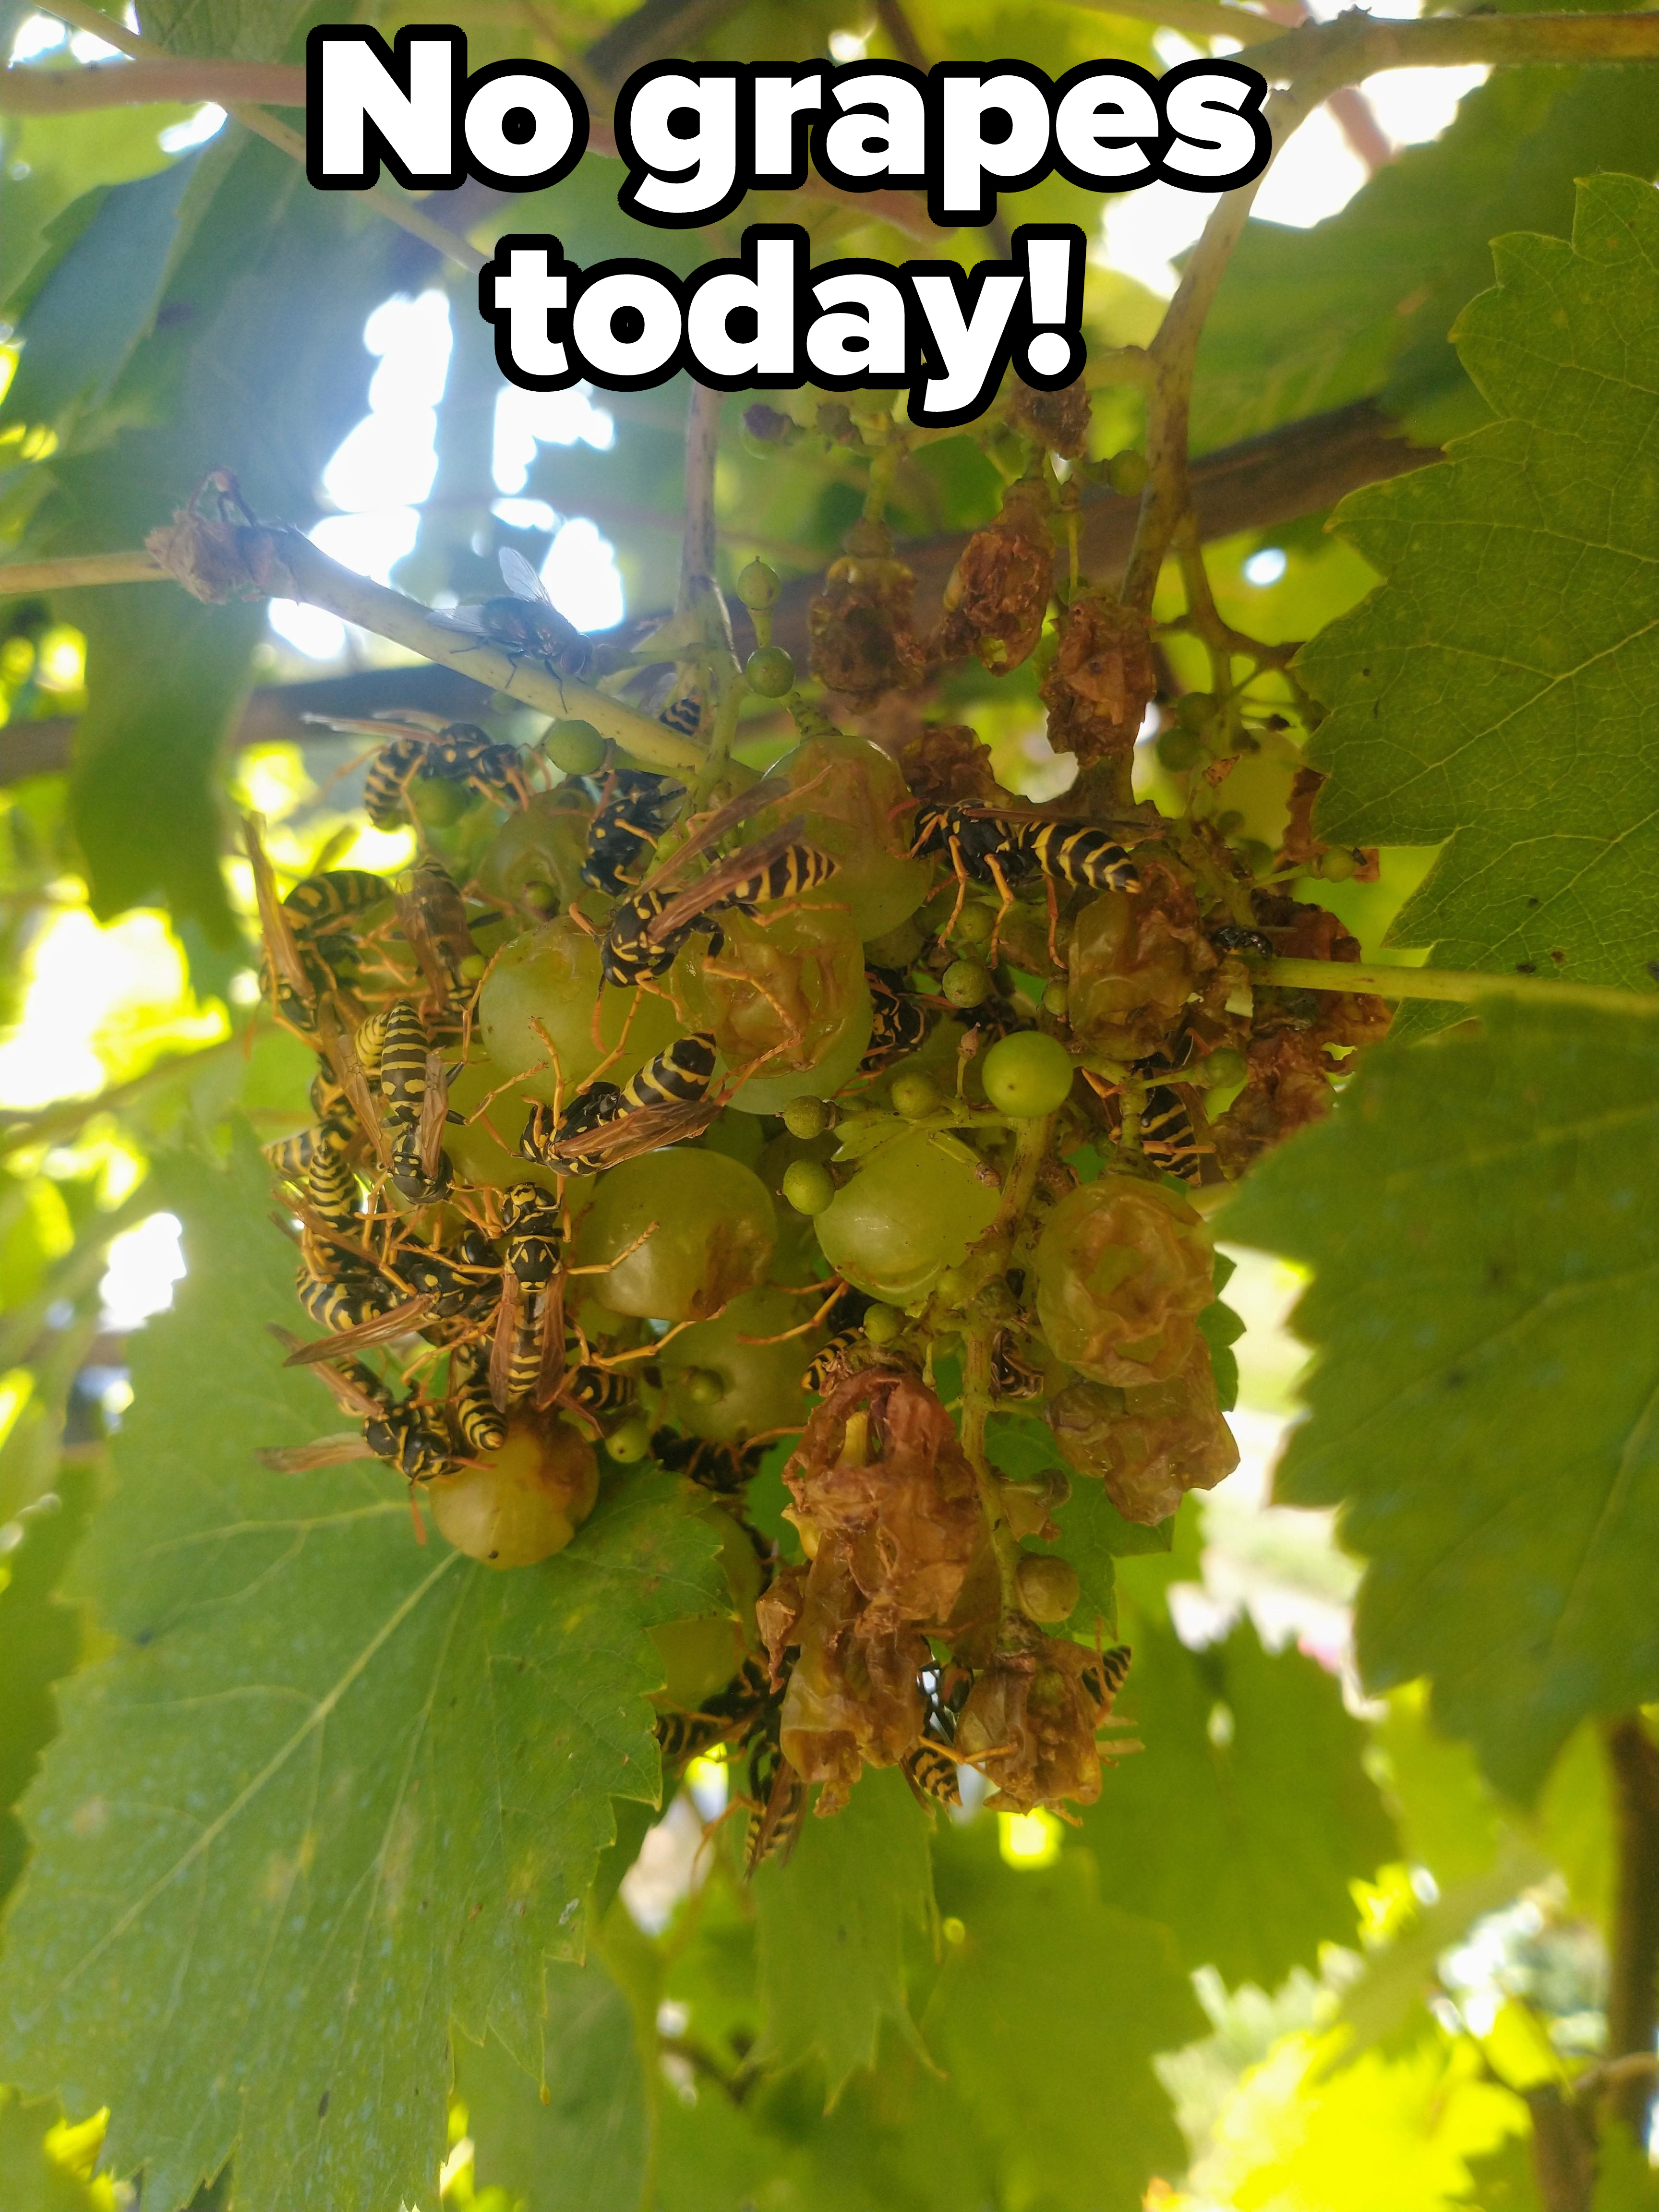 Wasps all over a bunch of grapes on a tree